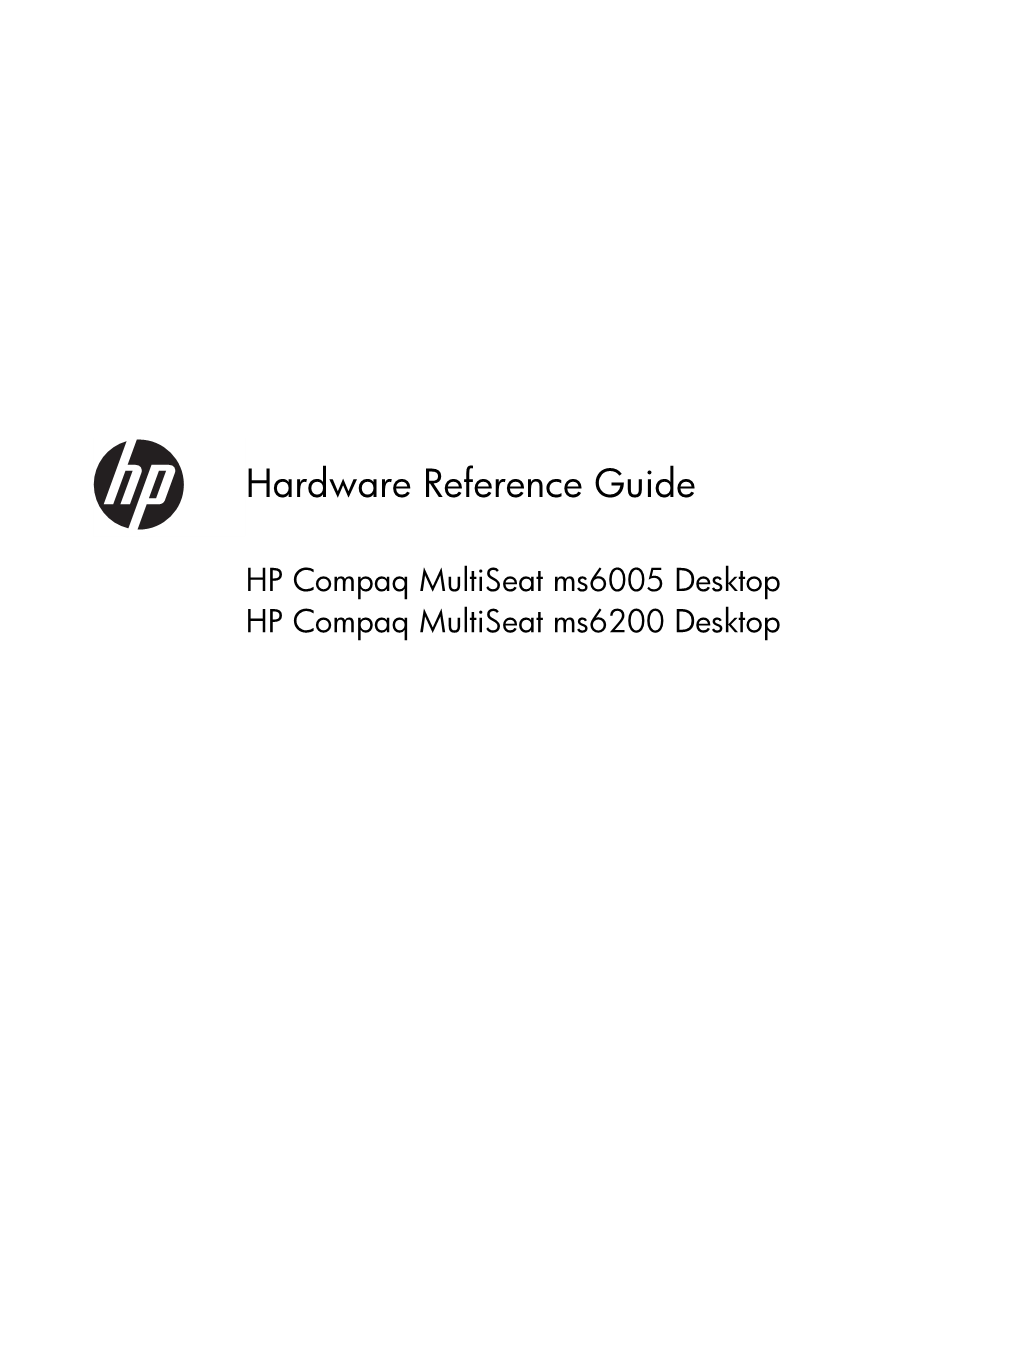 Hardware Reference Guide